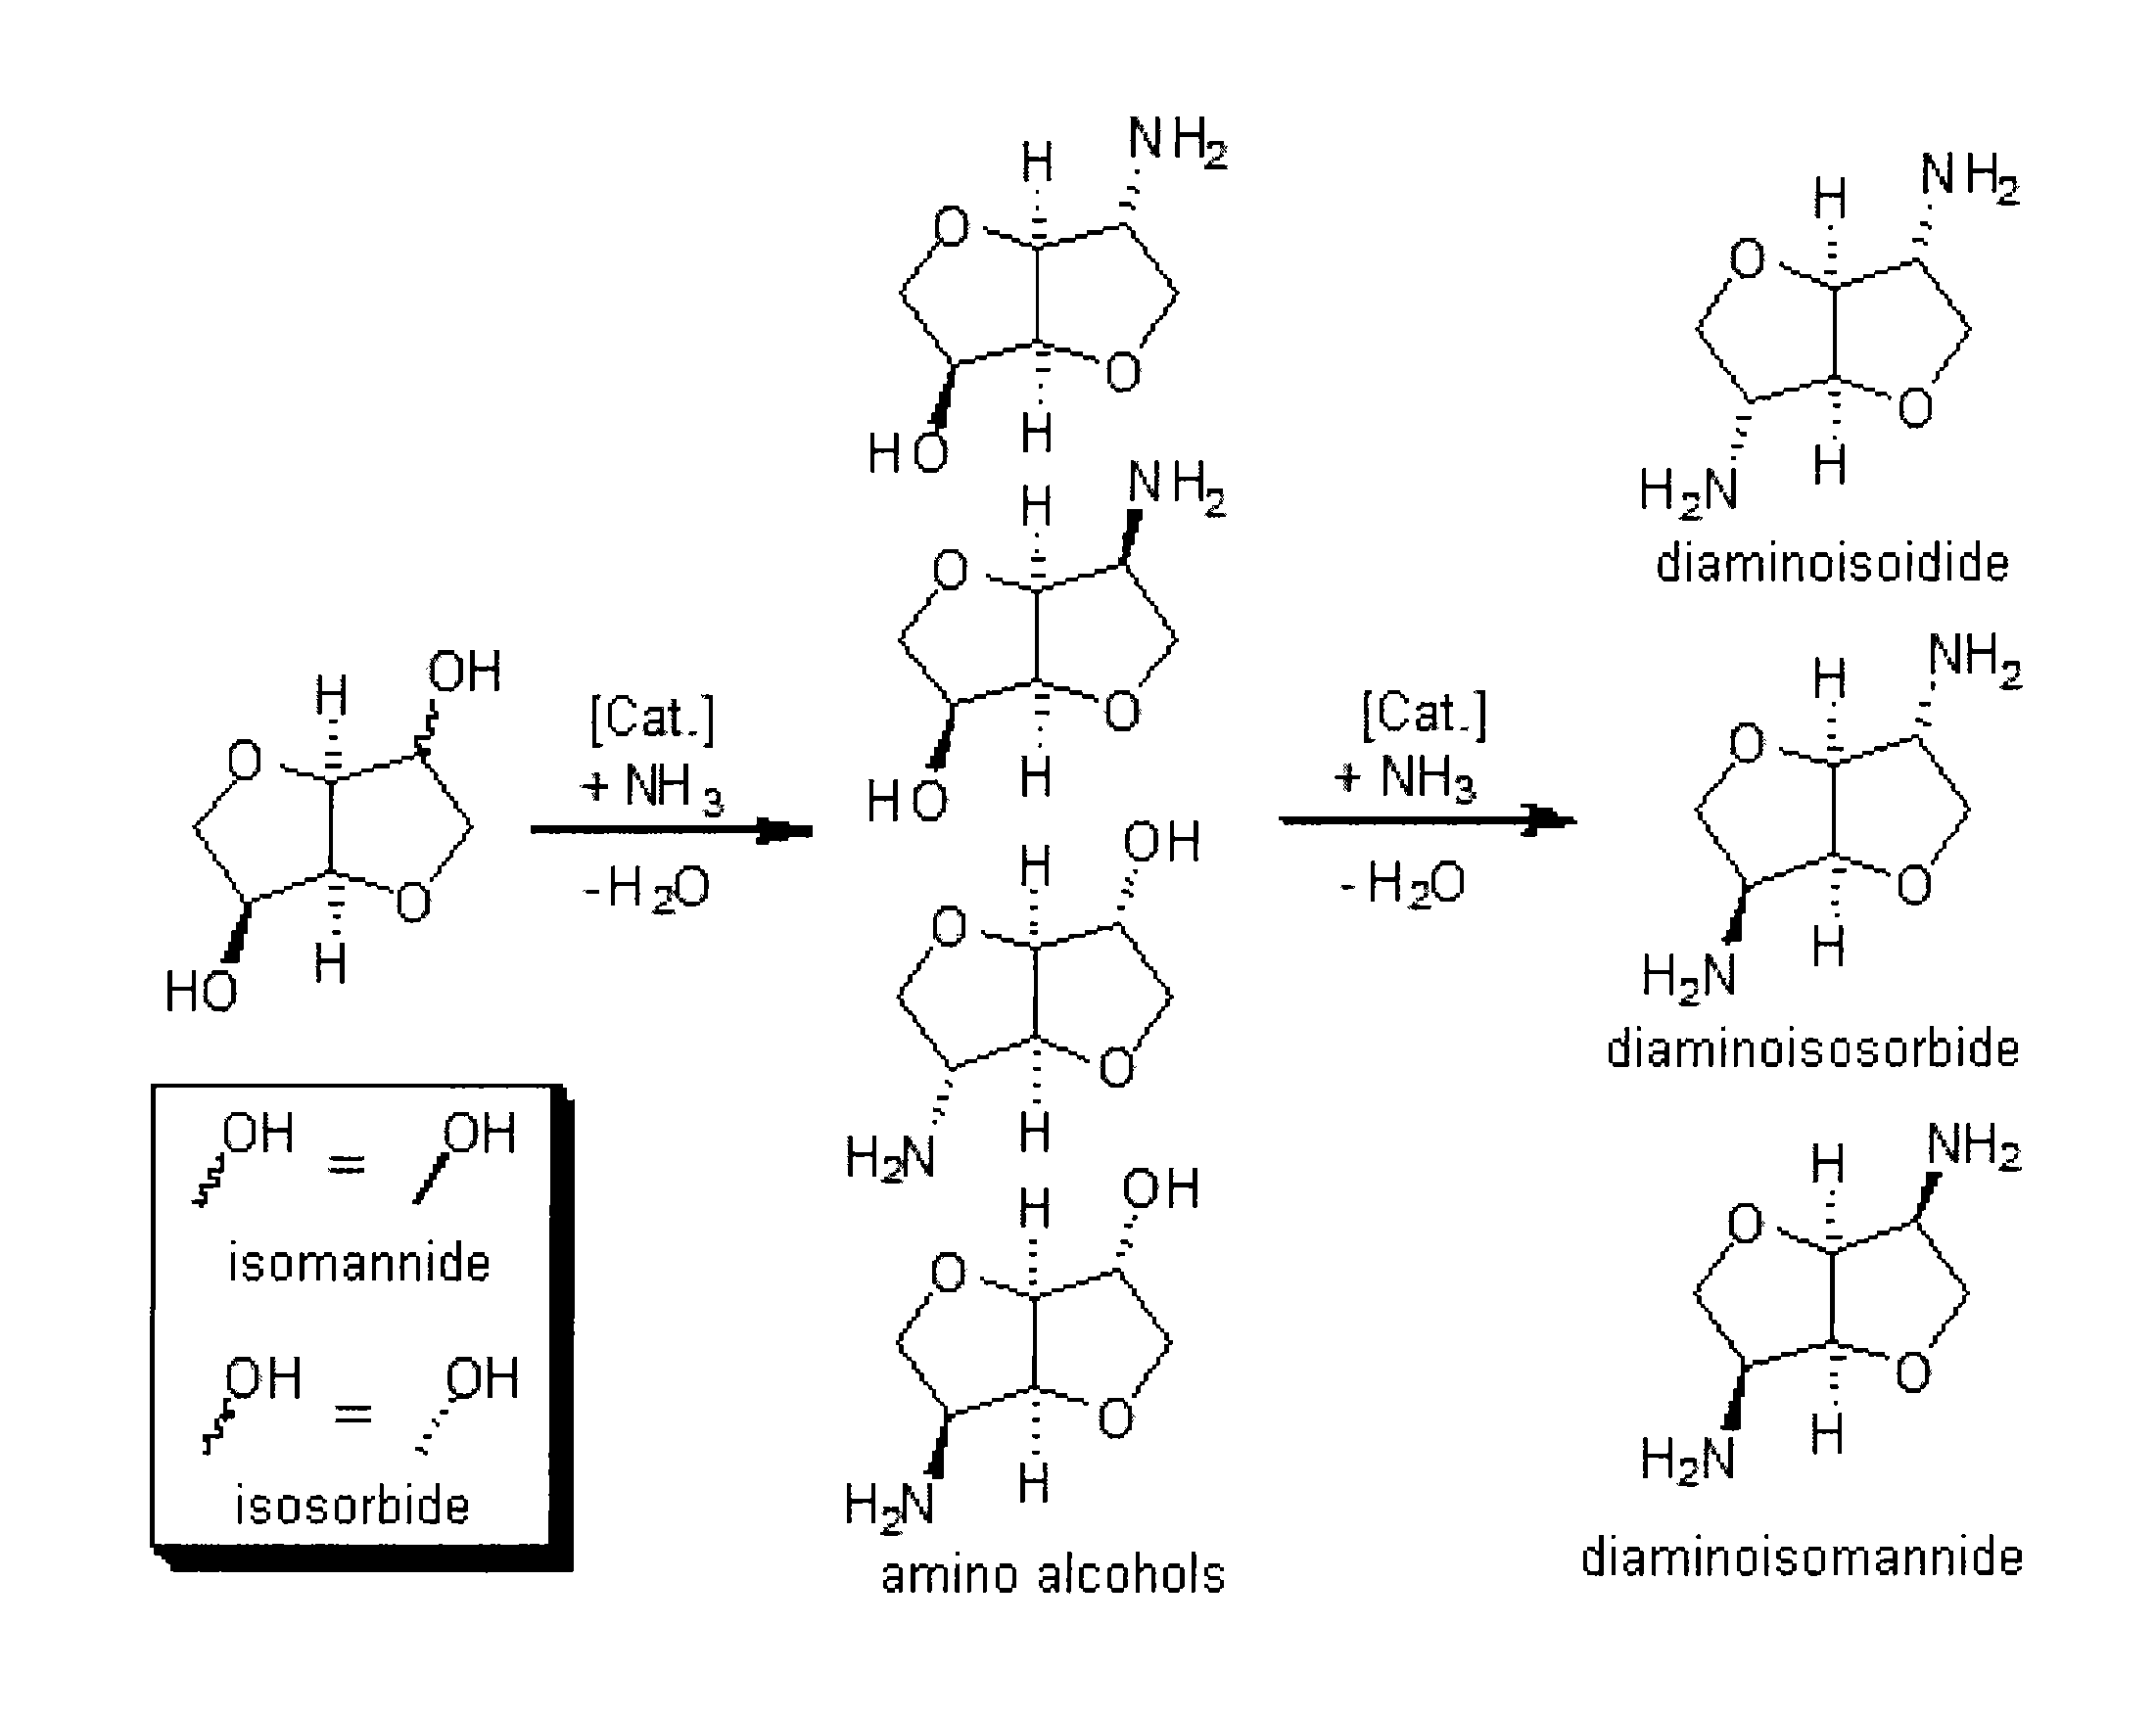 Process for the direct amination of secondary alcohols with ammonia to give primary amines